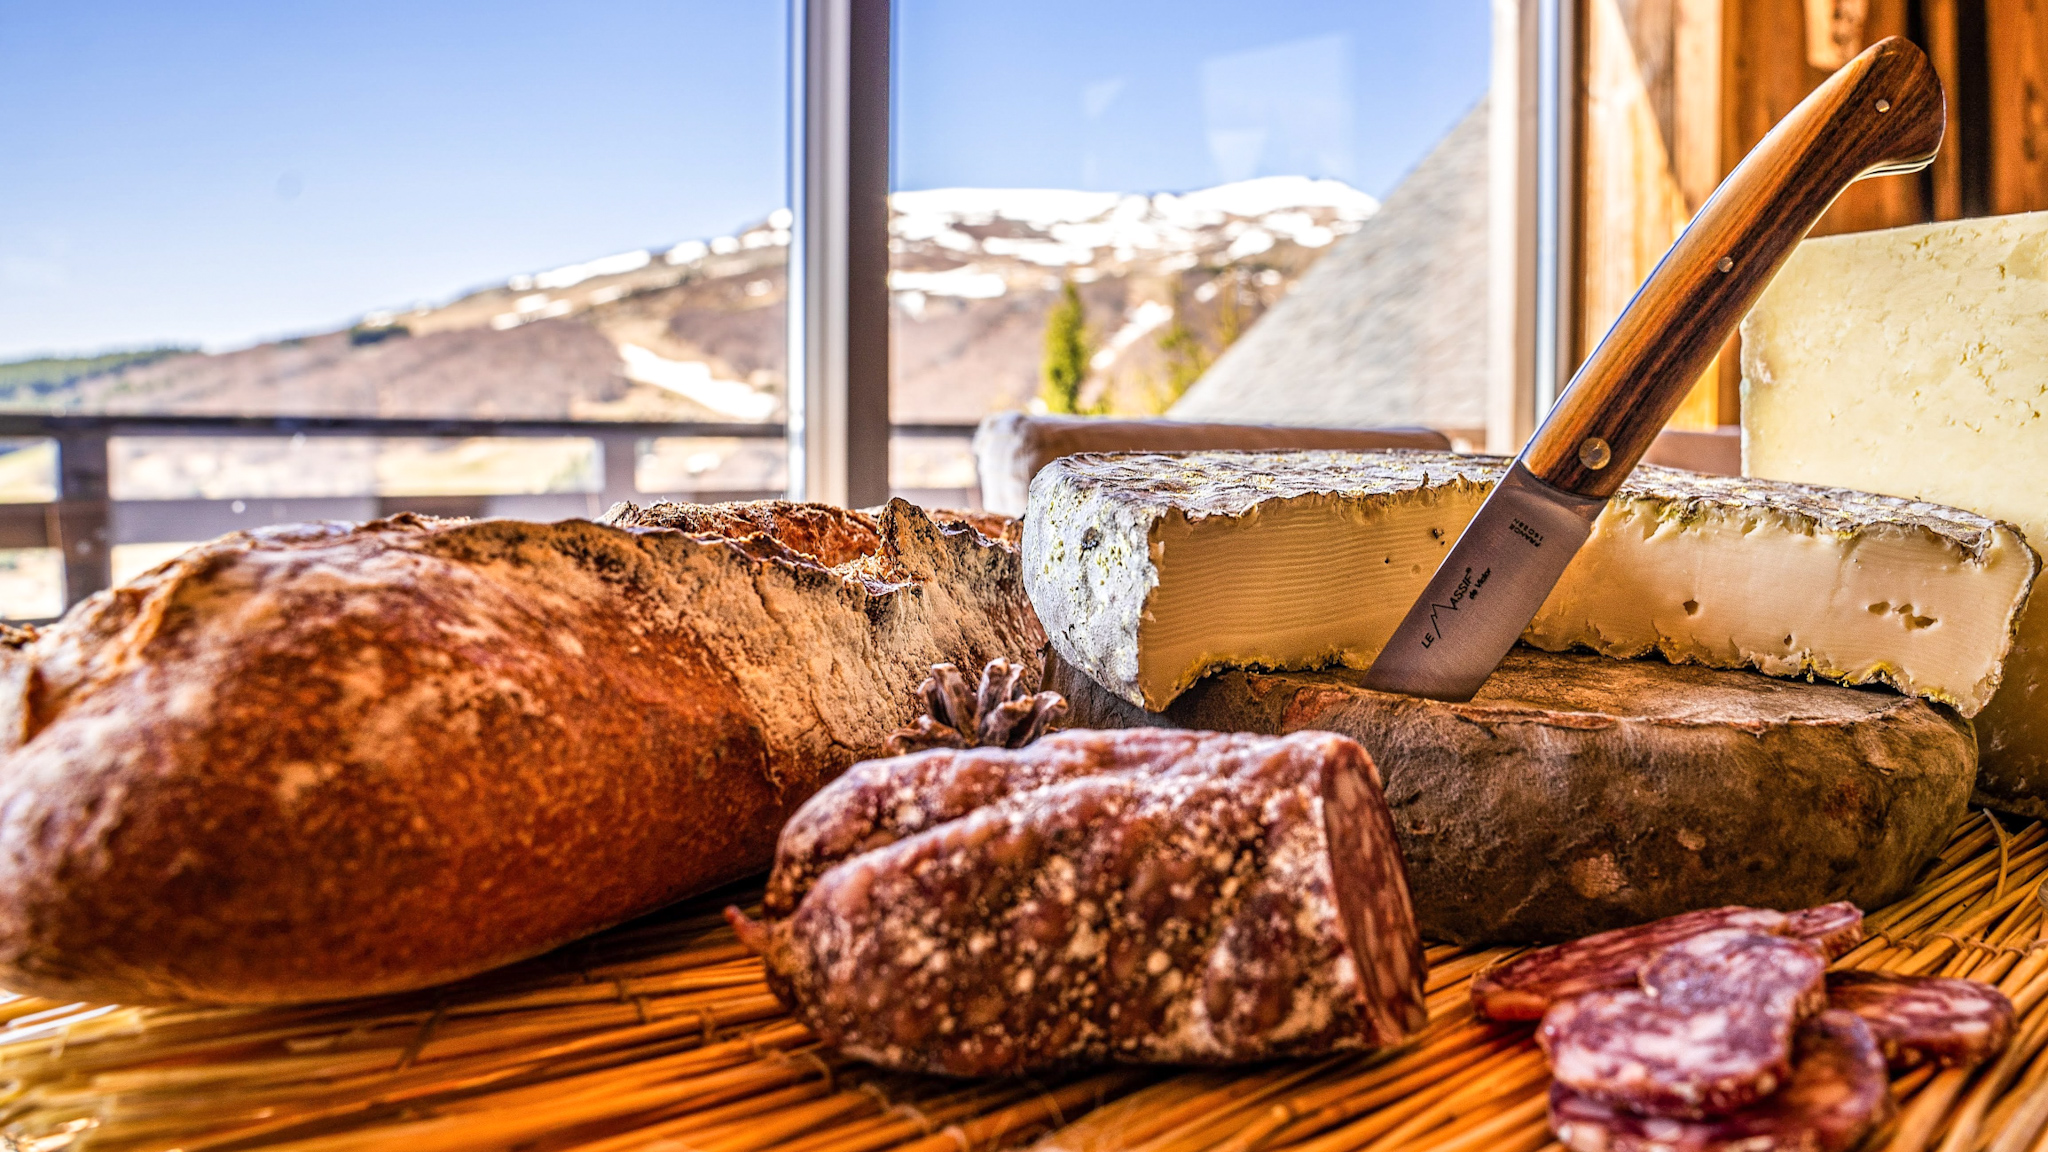 Chalet l'Anorak, local products, cheeses and charcuterie from Auvergne